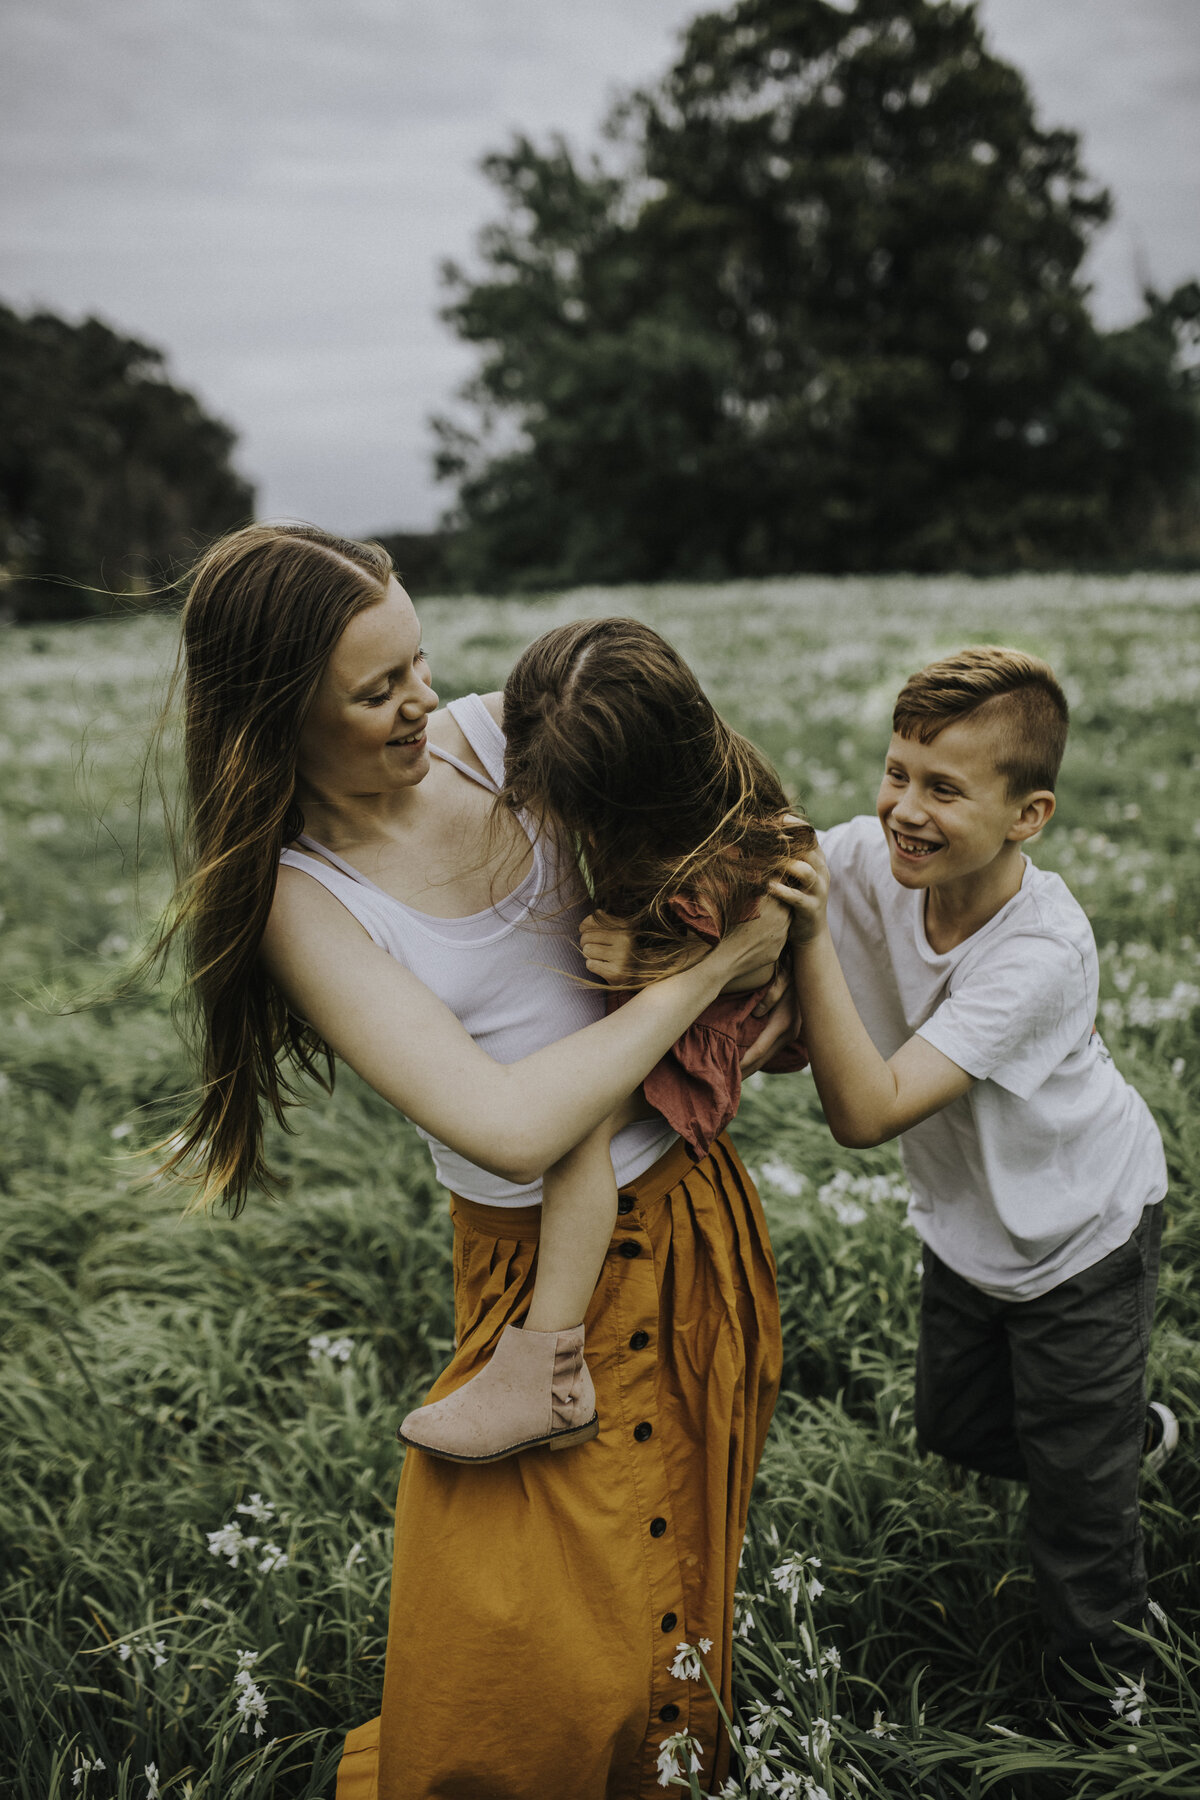 Candid fun photo of family kids playing laughing in field for Melbourne Family Lifestyle Photography Session with Sapphire and Stone Photography